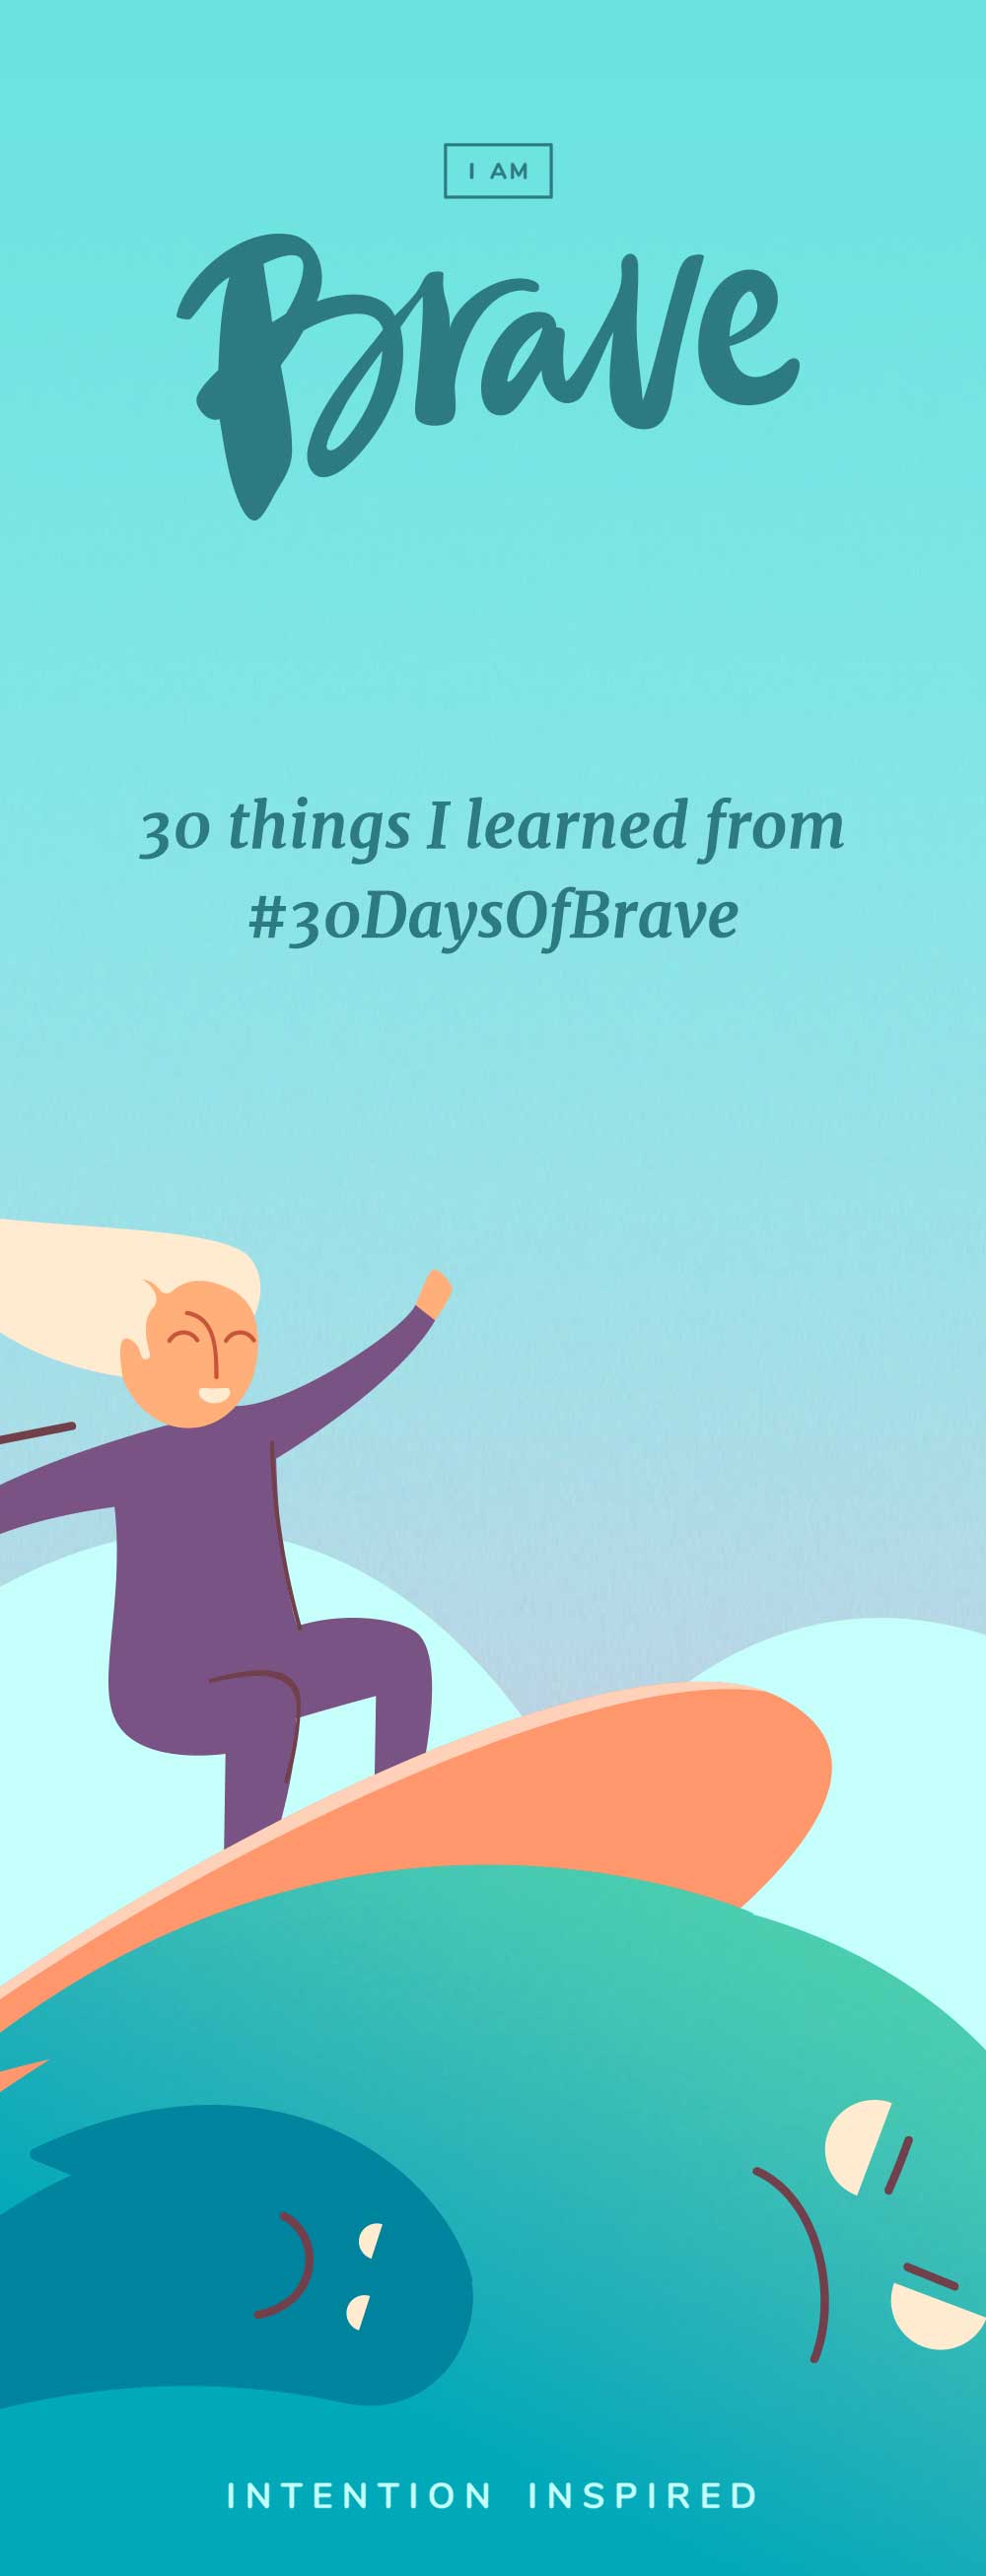 Here are 30 things I learned from completing the 30 Days of Brave Challenge.